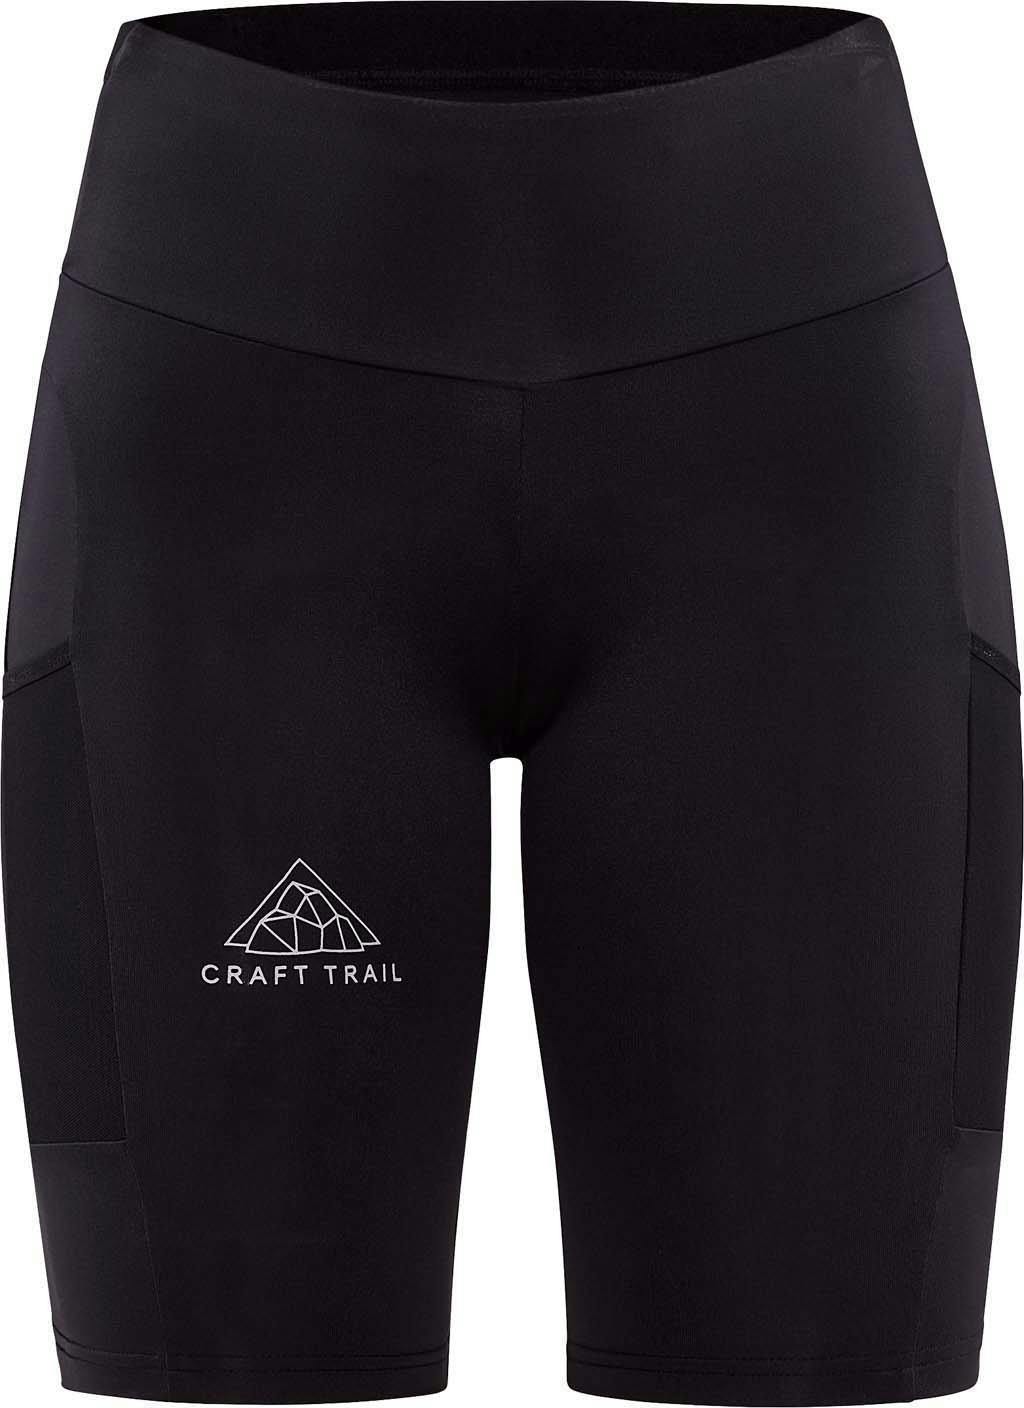 Product image for Pro Trail Short Tights - Women’s